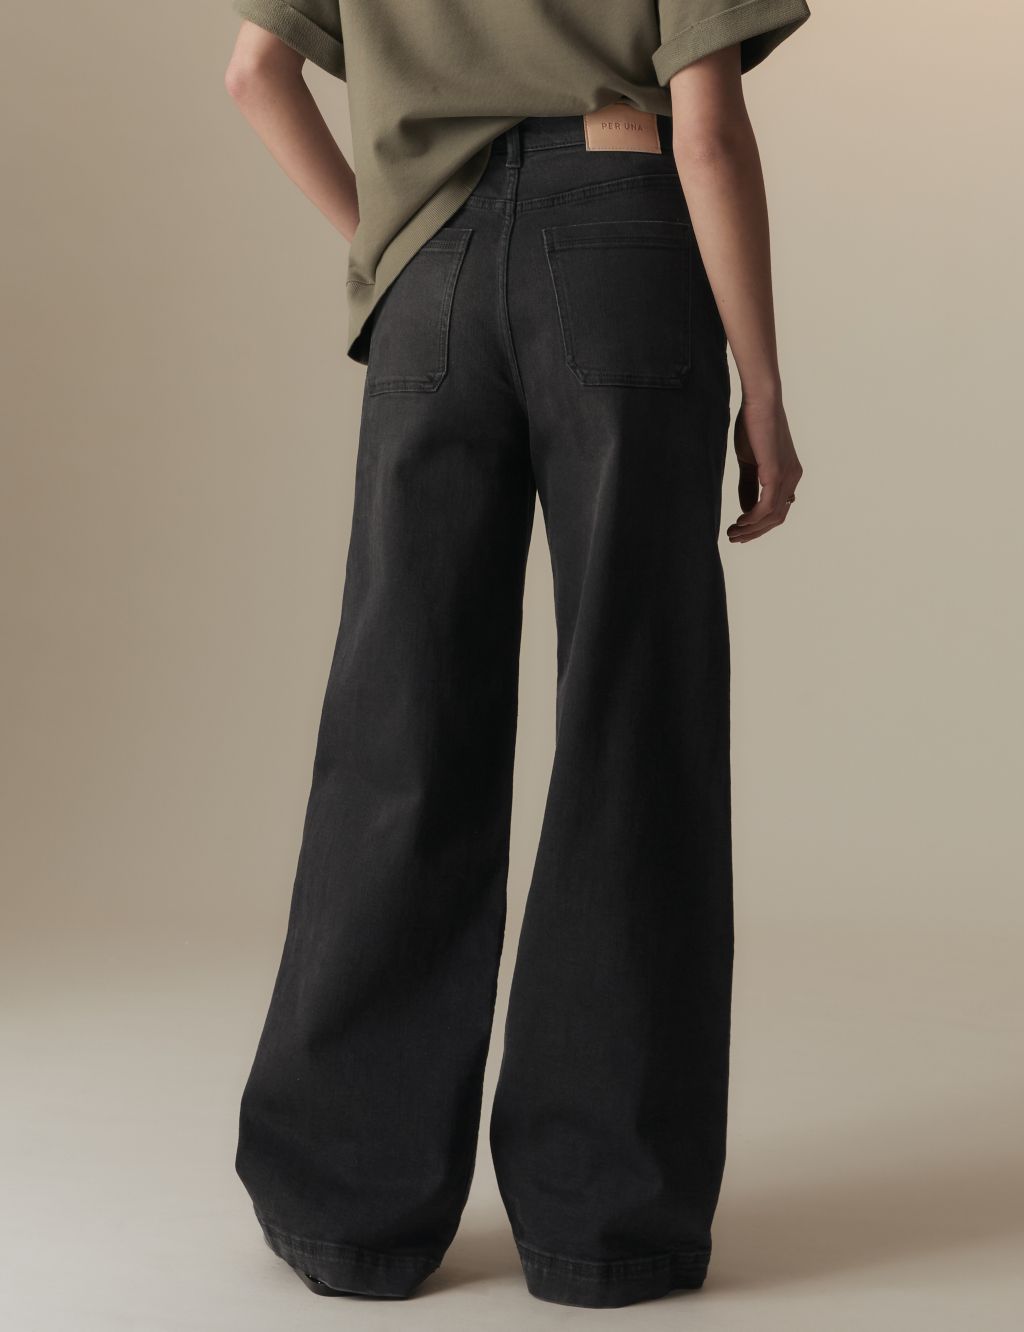 High Waisted Wide Leg Jeans image 6